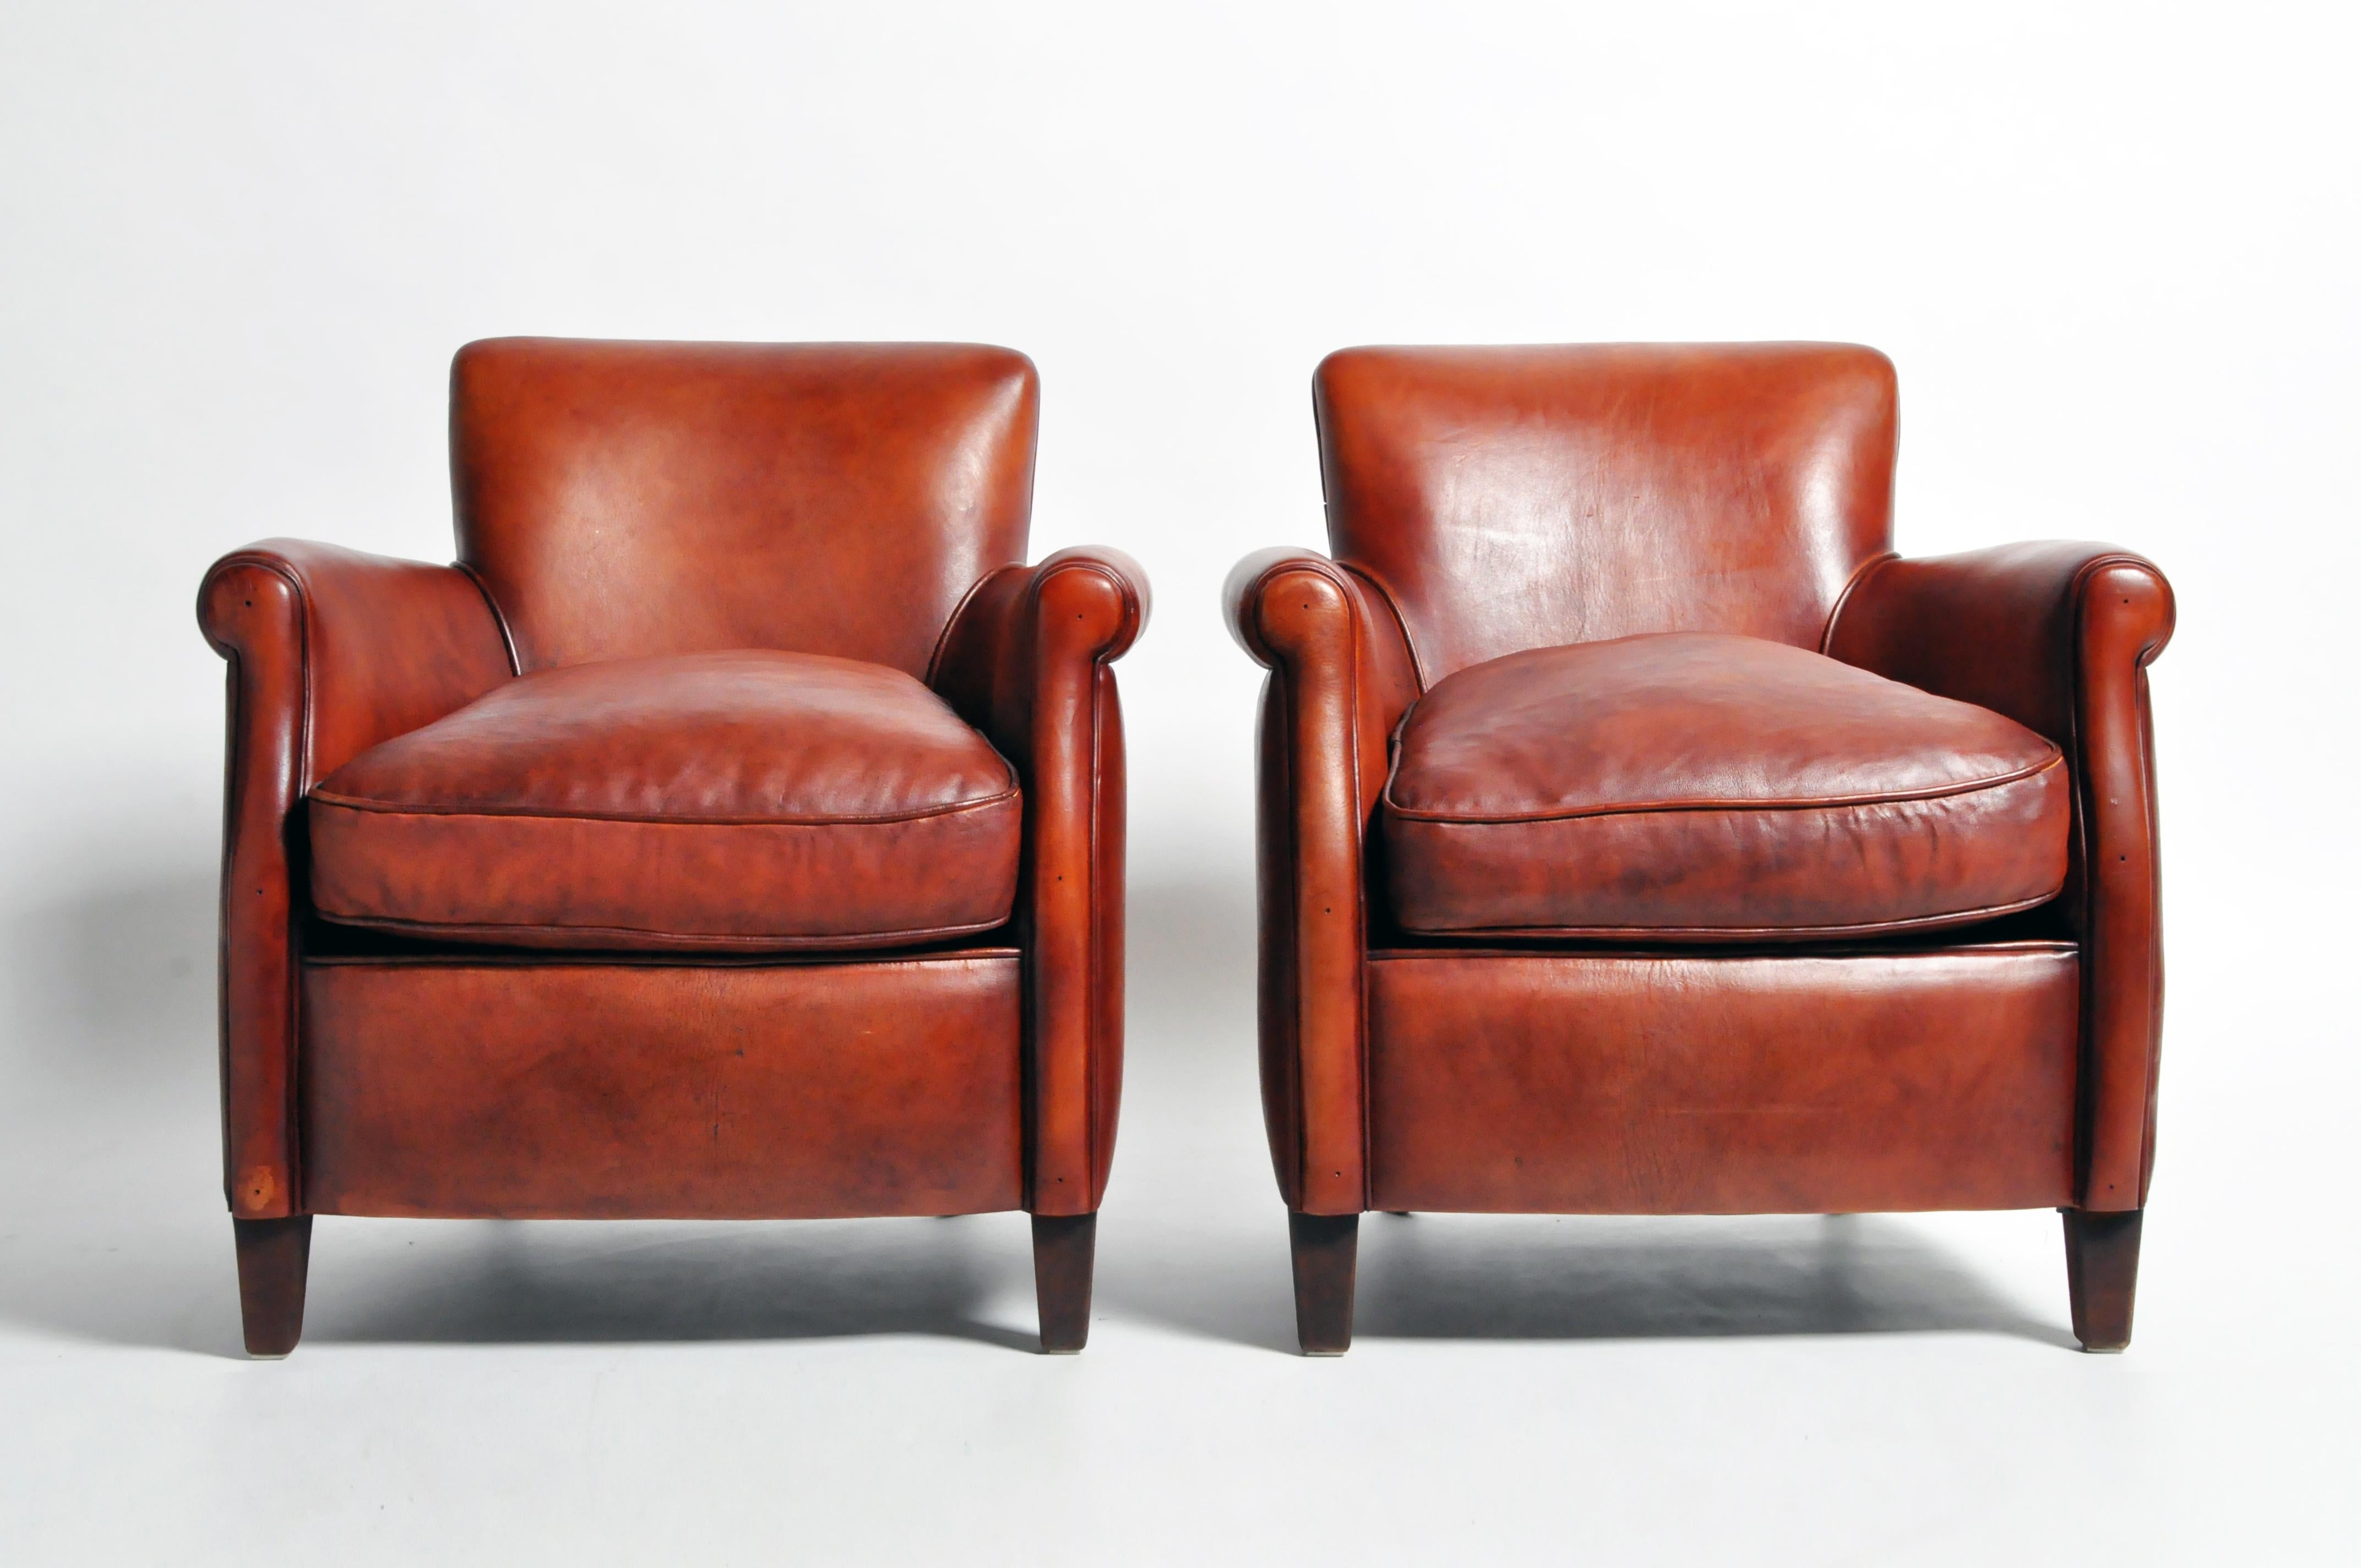 This pair of armchairs are from France and made from leather and wood, circa 21st century. They are newly made and feature a beautiful oxblood brown color; sturdy, comfortable, and ready for daily use.